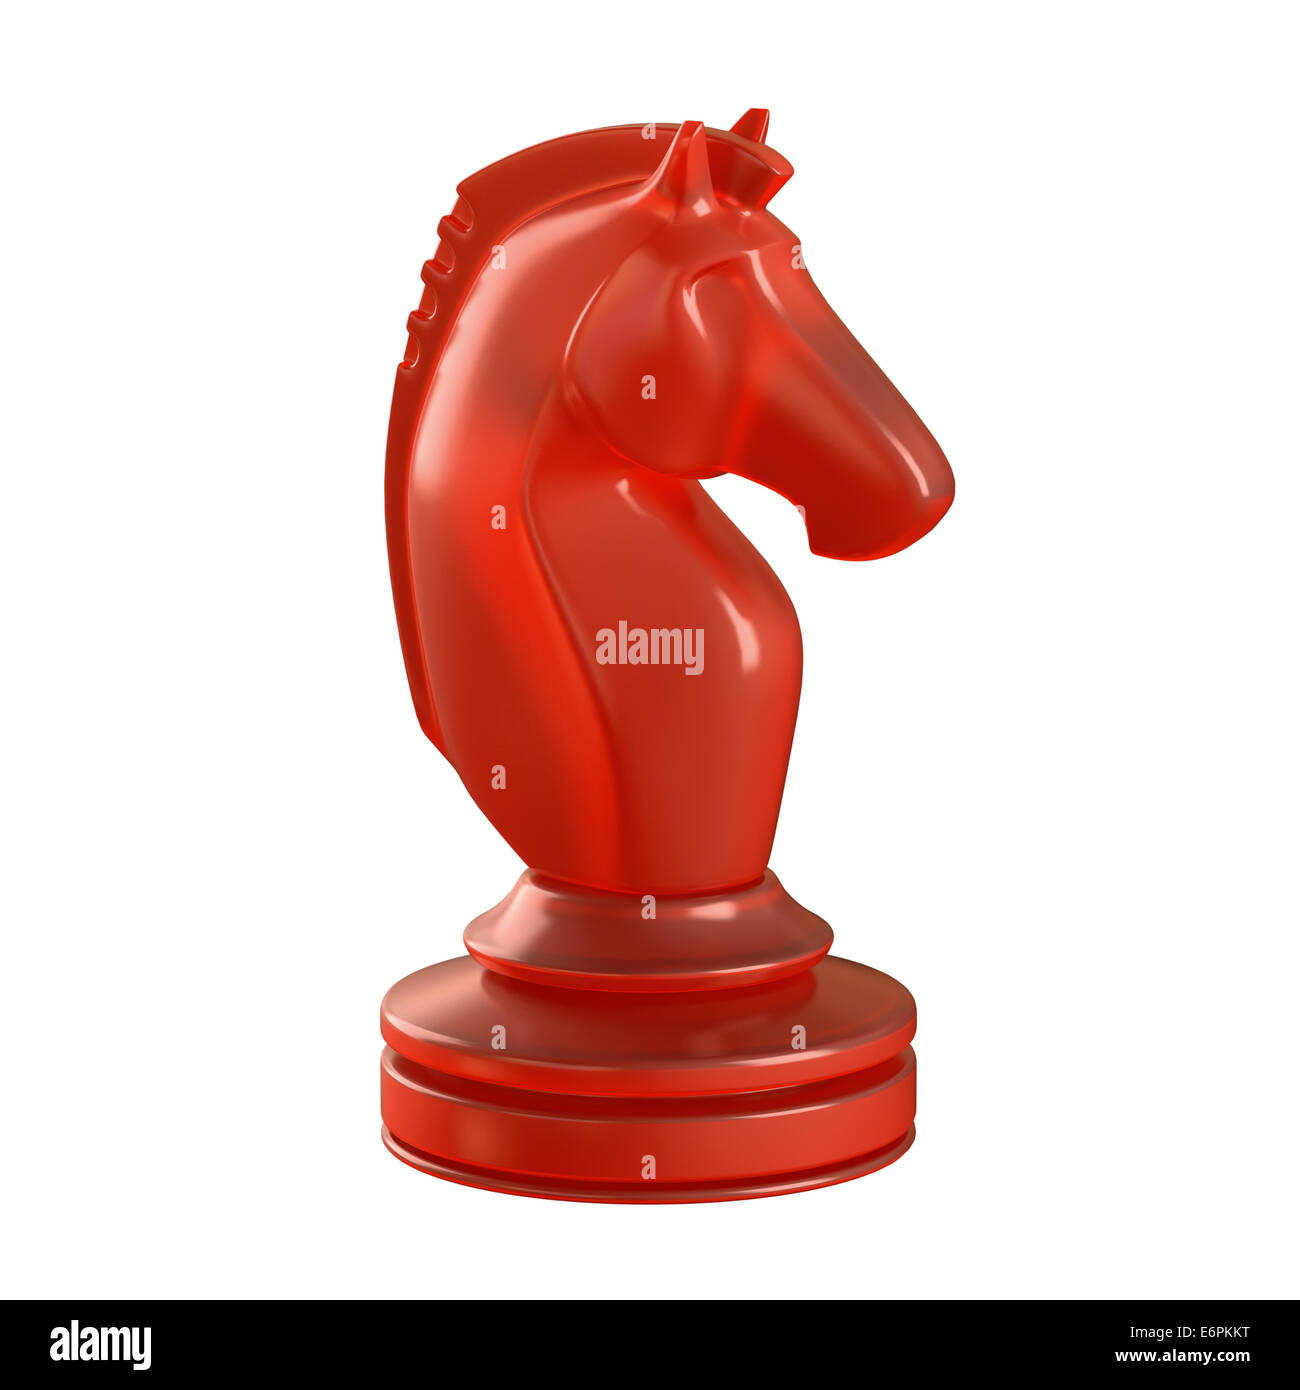 Red glass chess piece isolated. Clipping path included. Stock Photo